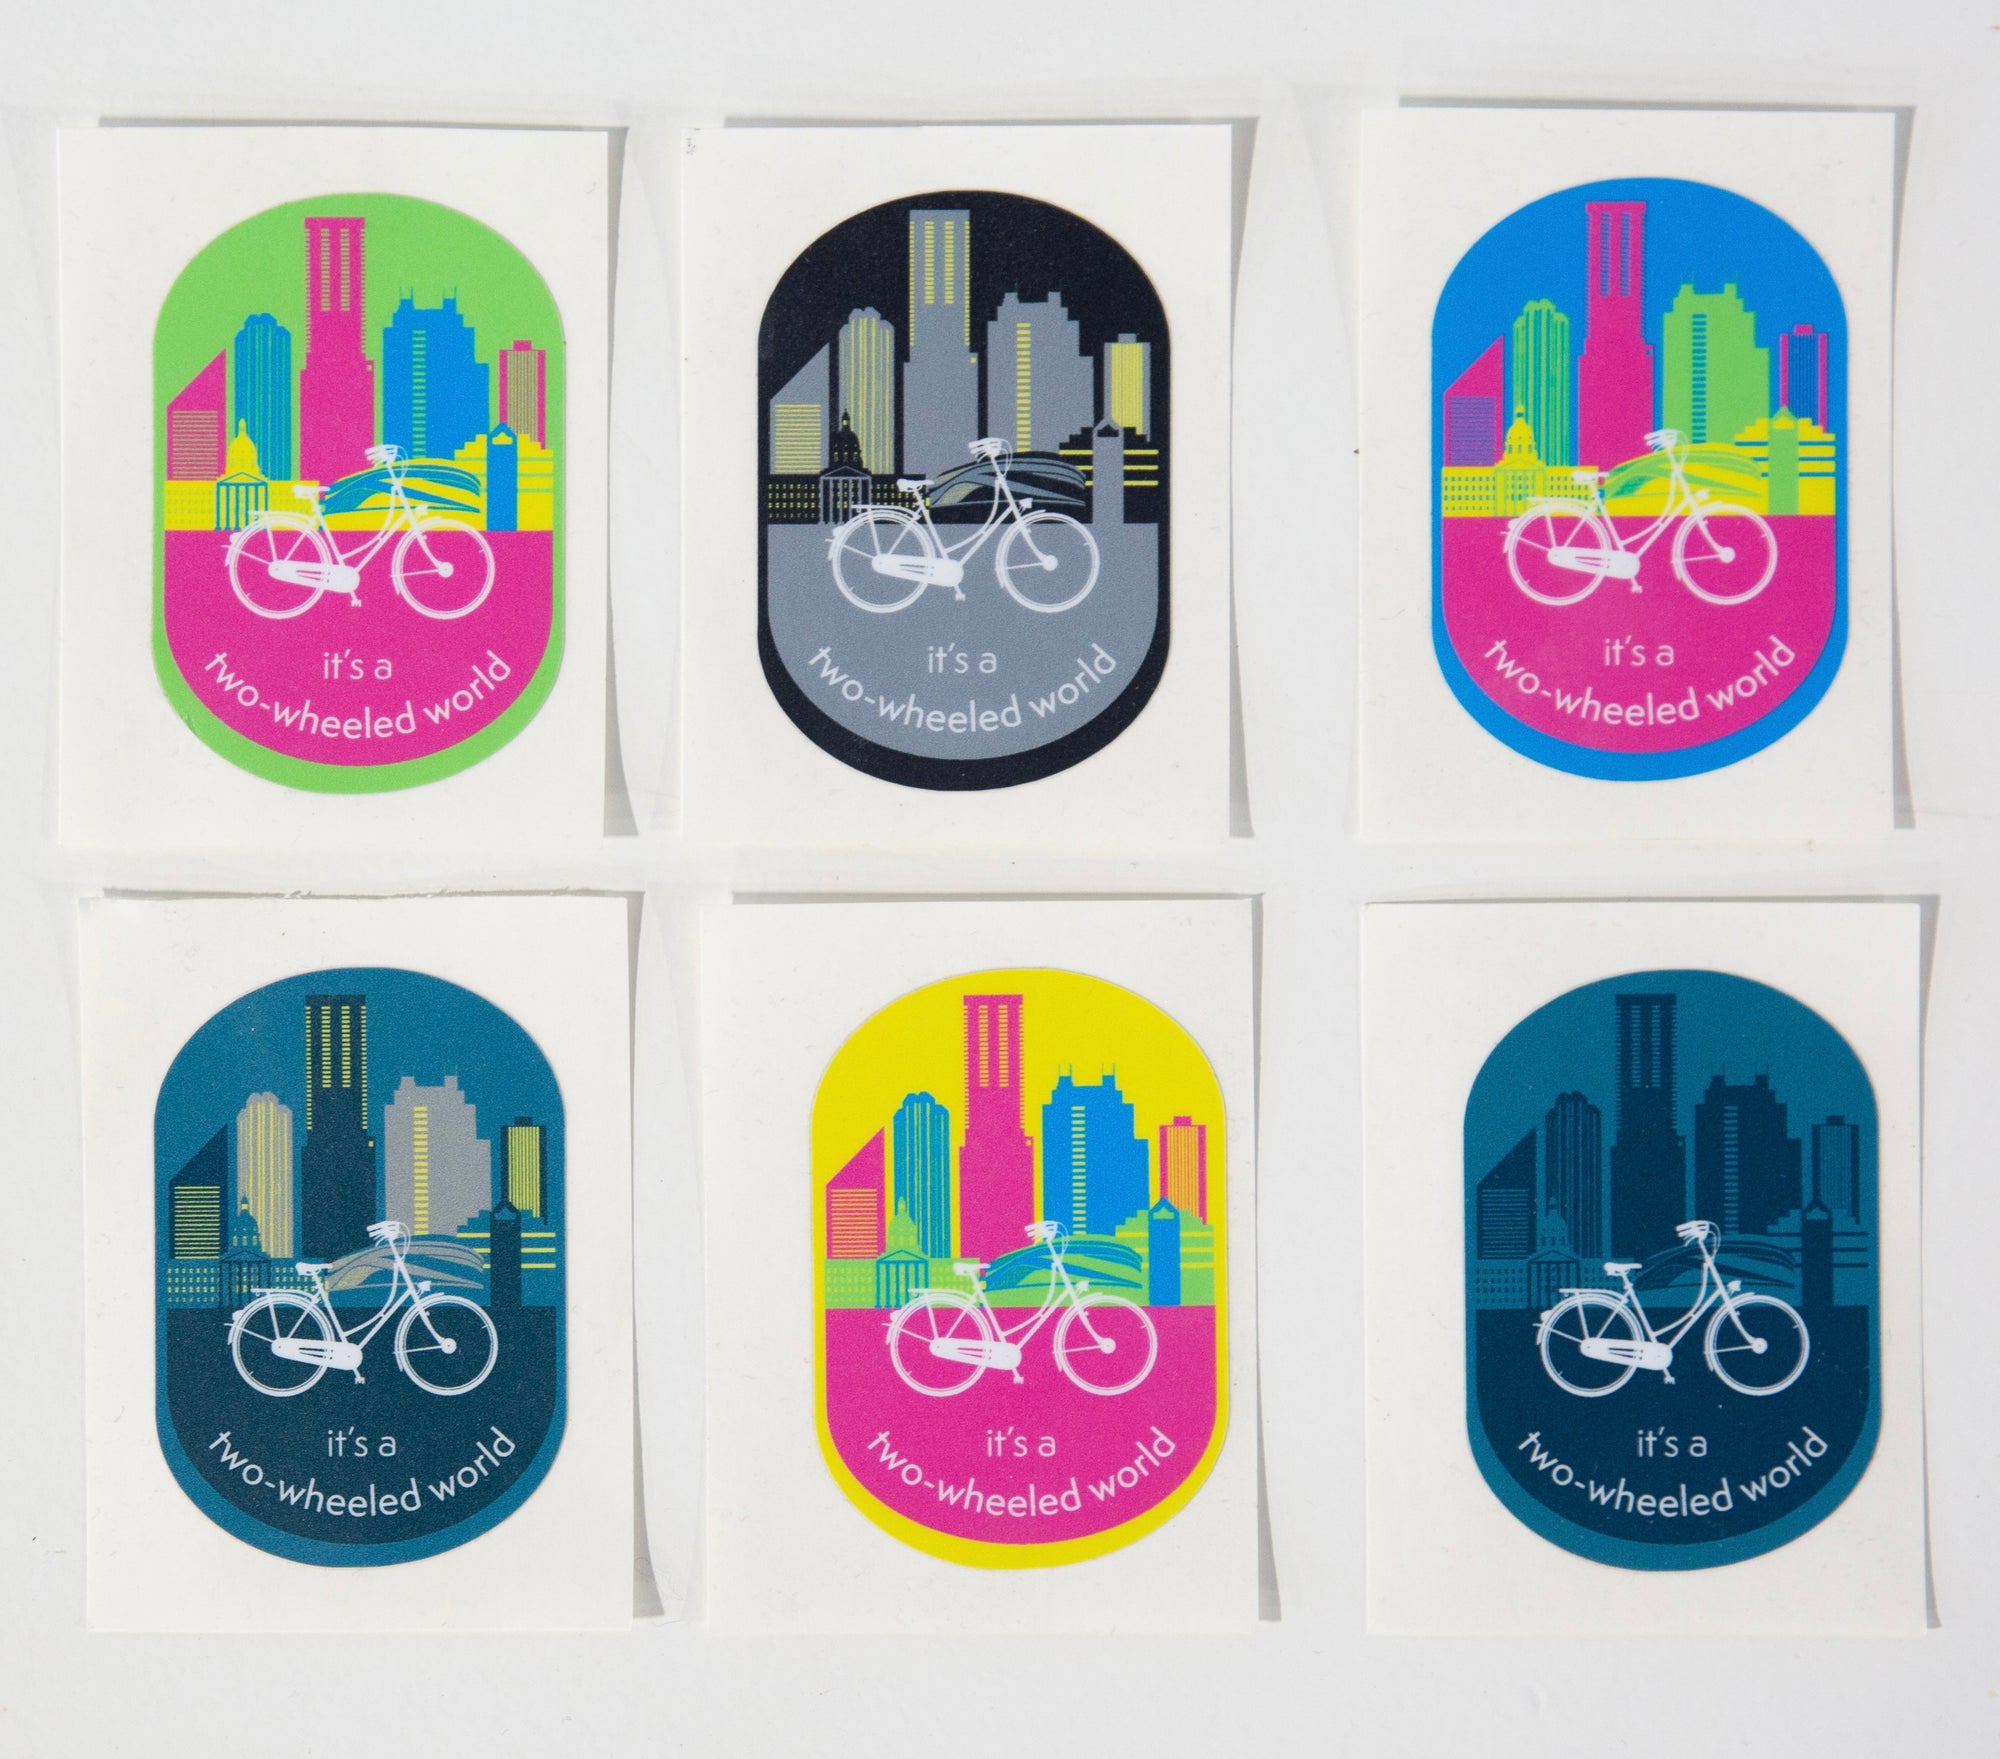 IT'S A TWO-WHEELED WORLD Logo Stickers